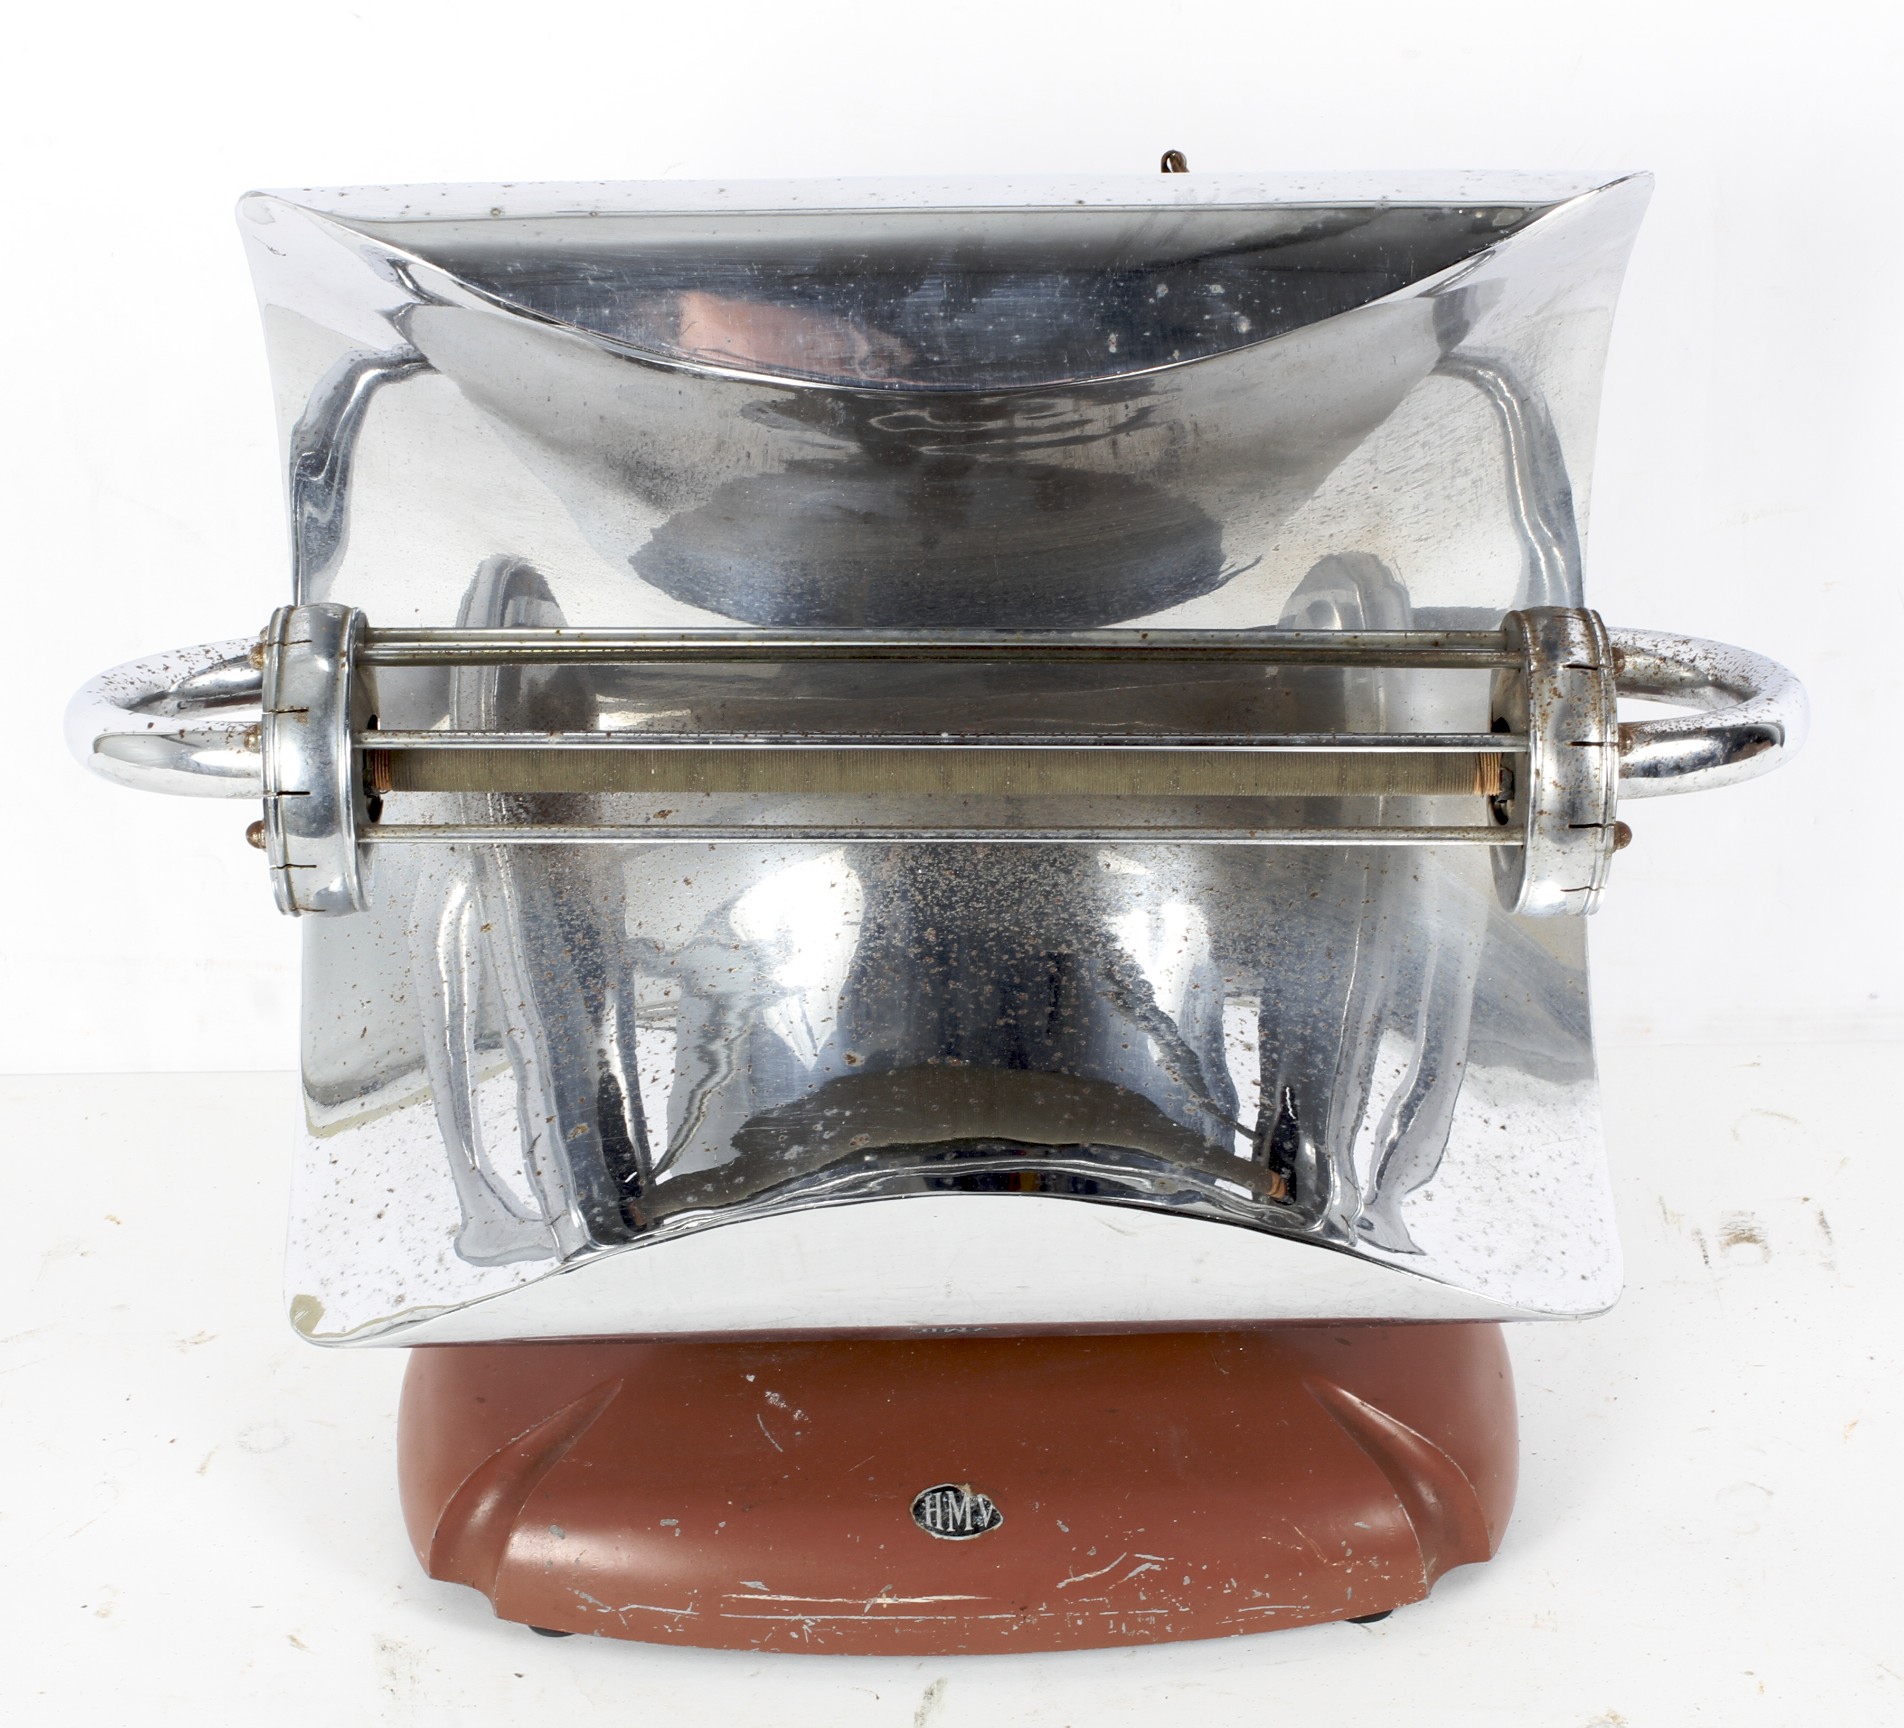 A 1930s electric fire heater with convex